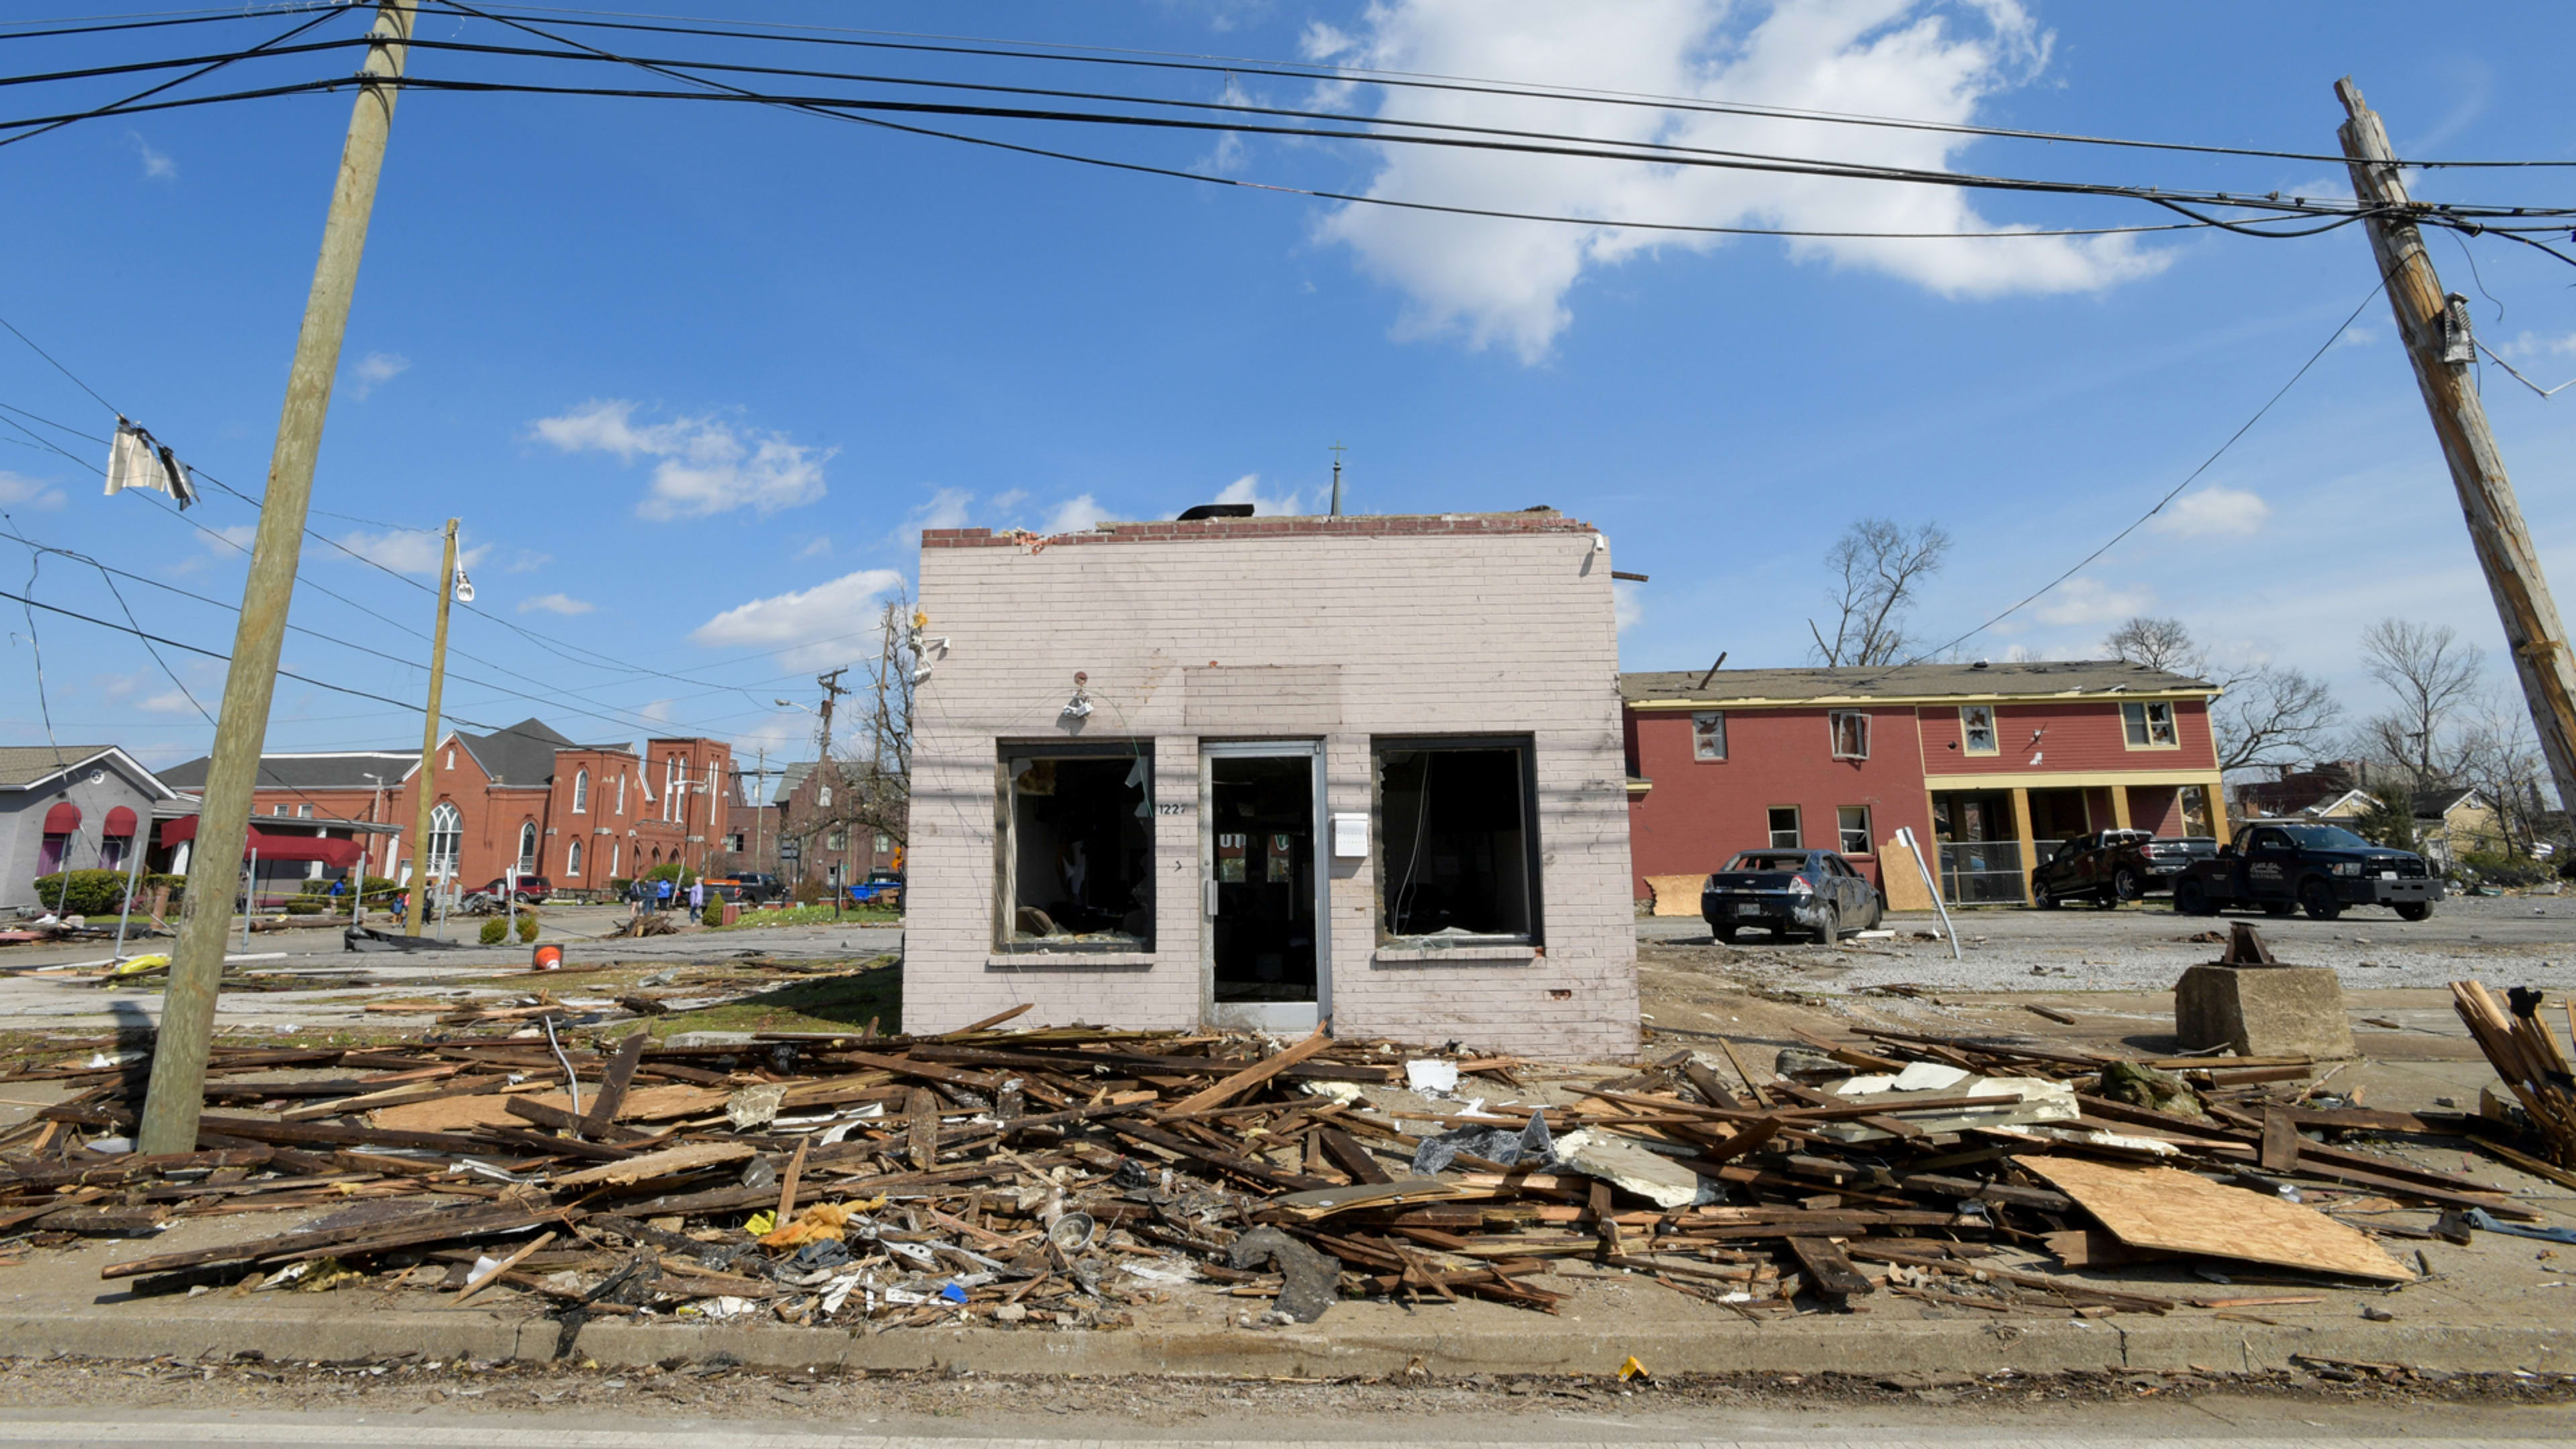 How to help Tennessee tornado victims: 7 things you can do right now